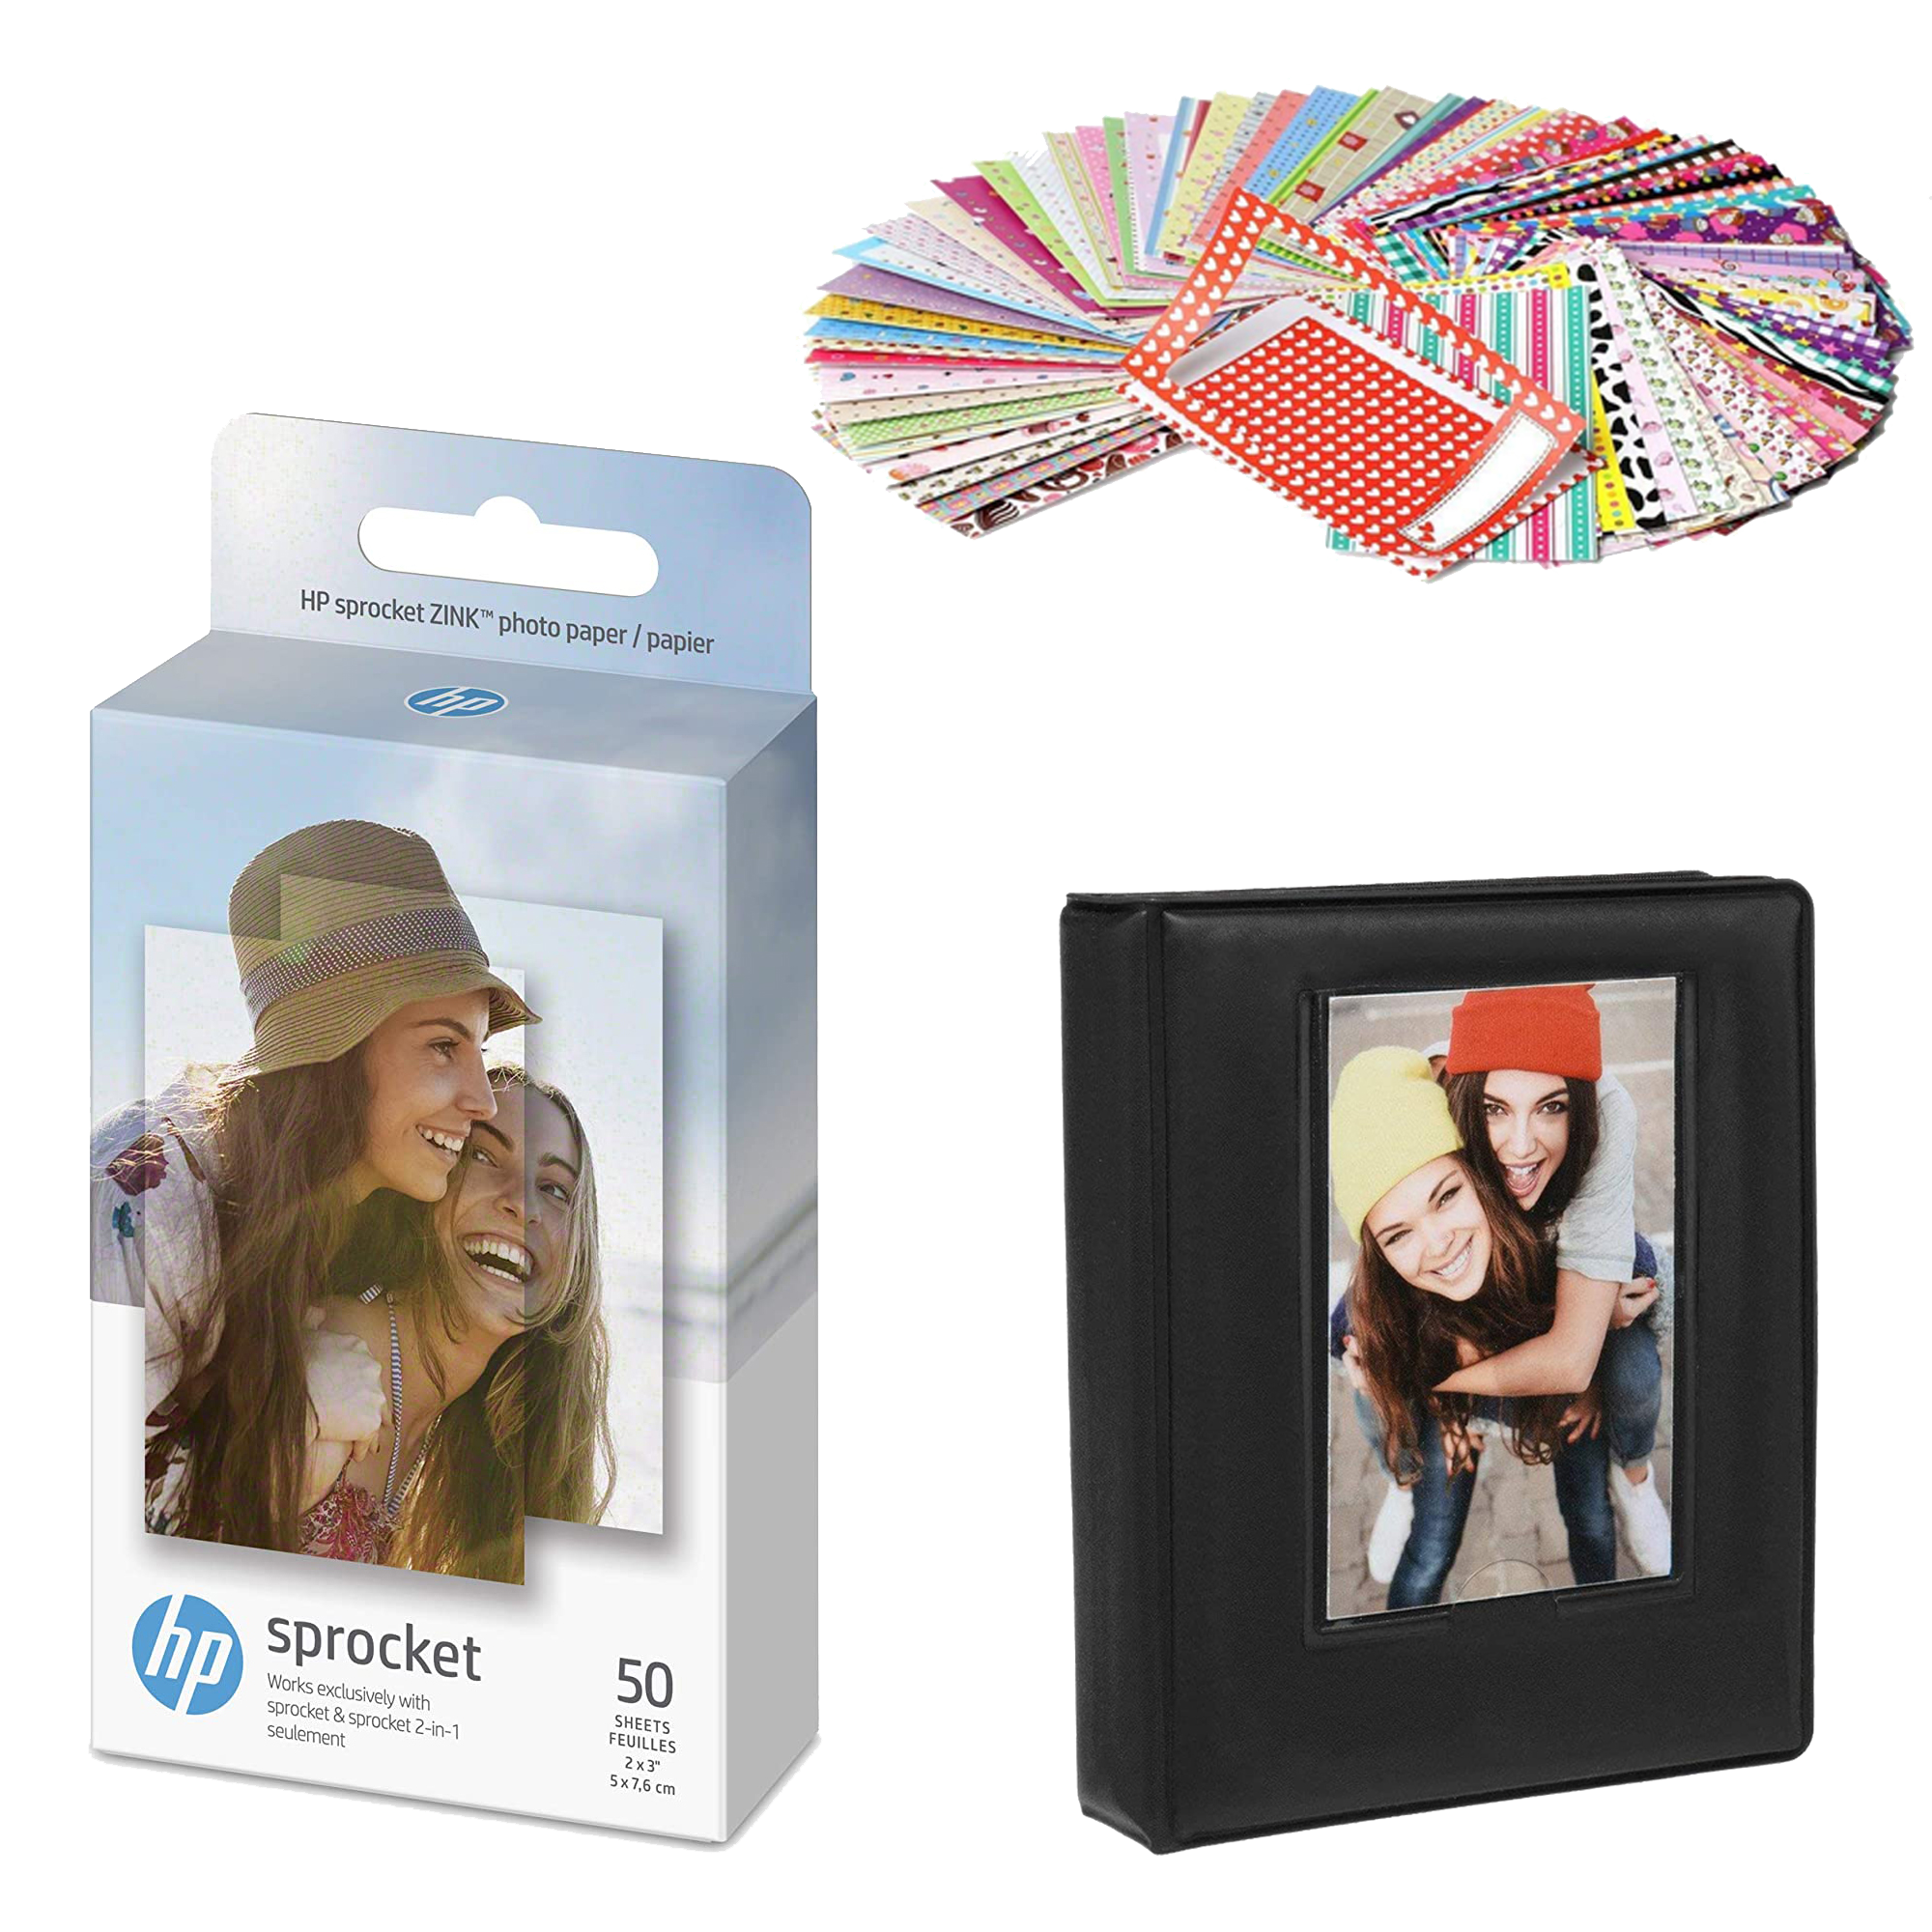 HP HP Sprocket 2x3 Premium Zink Sticky Back Photo Paper (20 Sheets)  Compatible with HP Sprocket Photo Printers. in the Printers department at